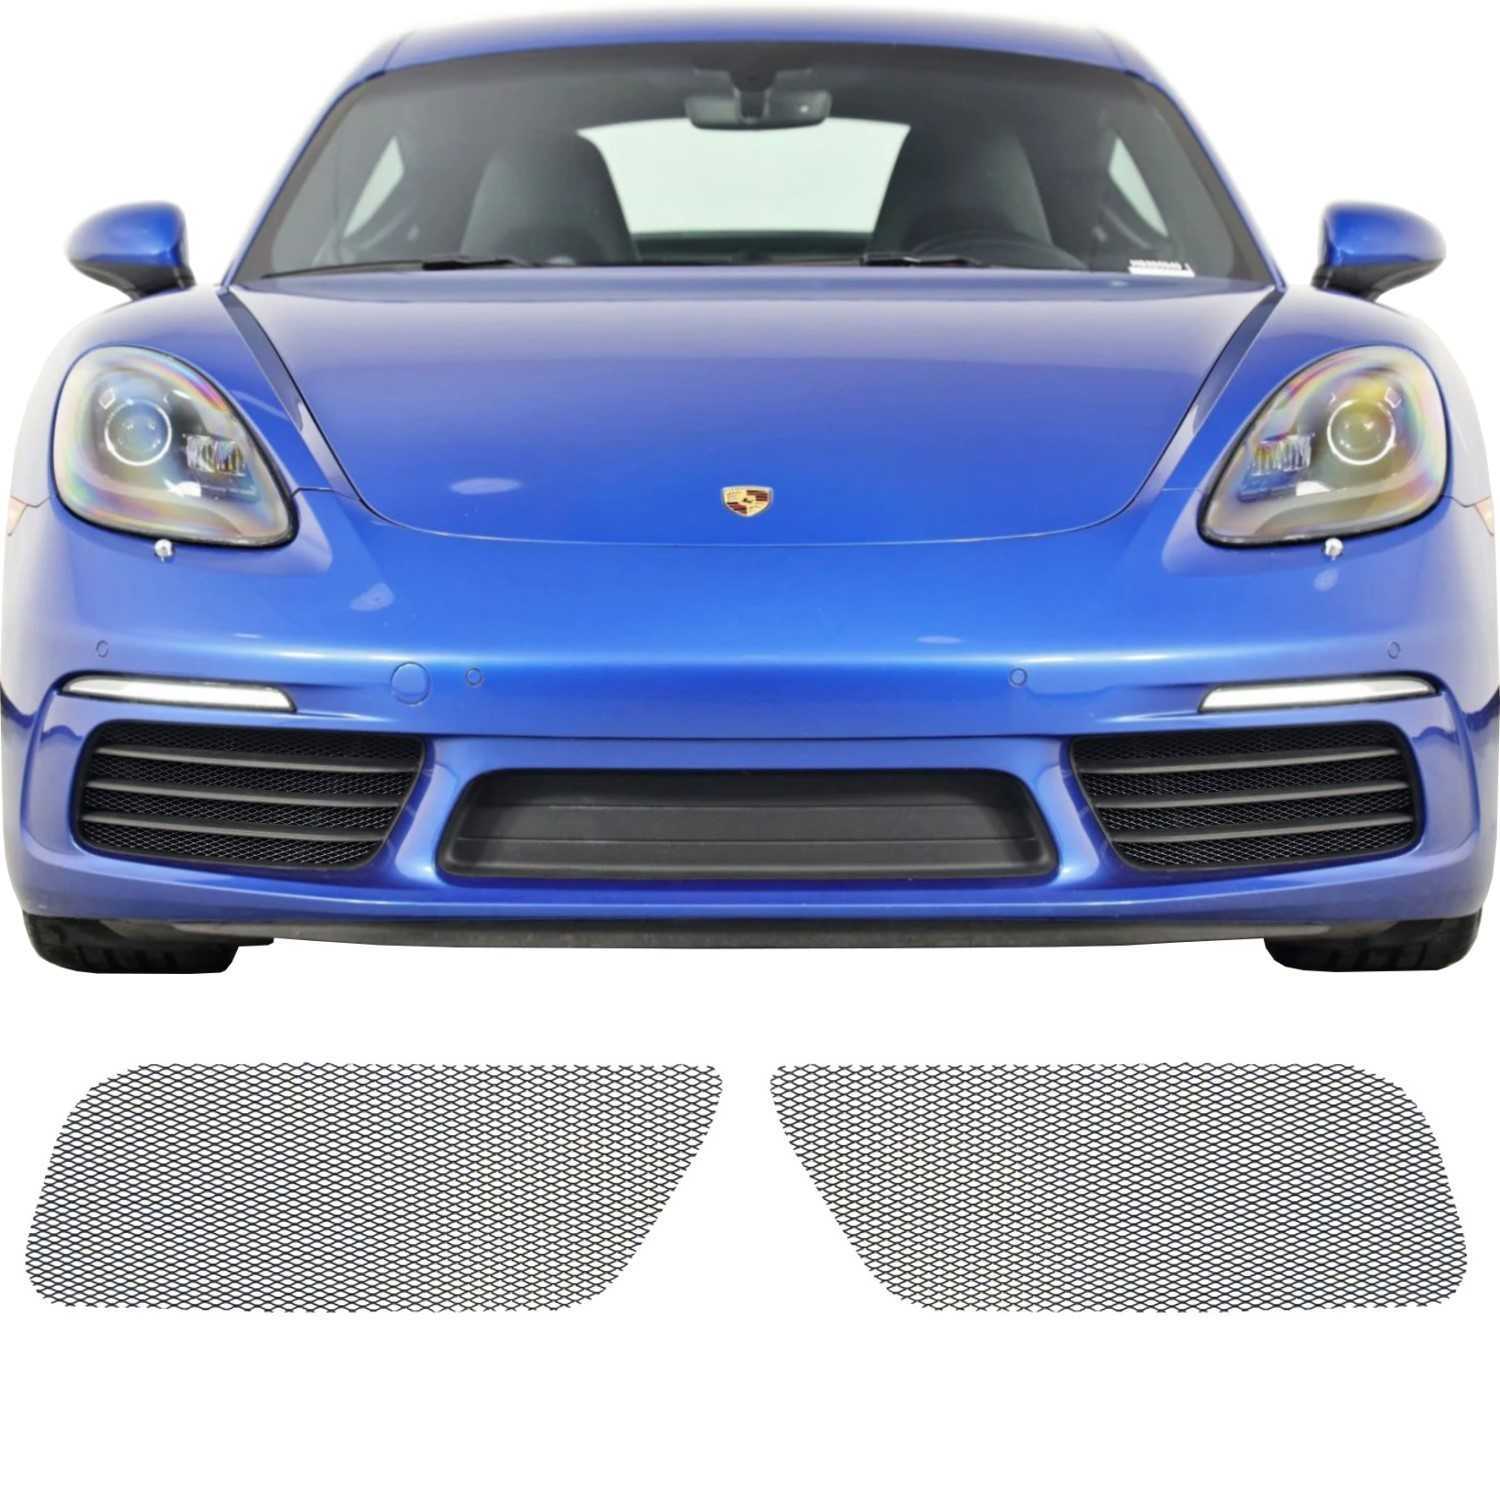 Introducing the New Custom Grille for 2017+ Porsche Cayman: Style and Protection Combined